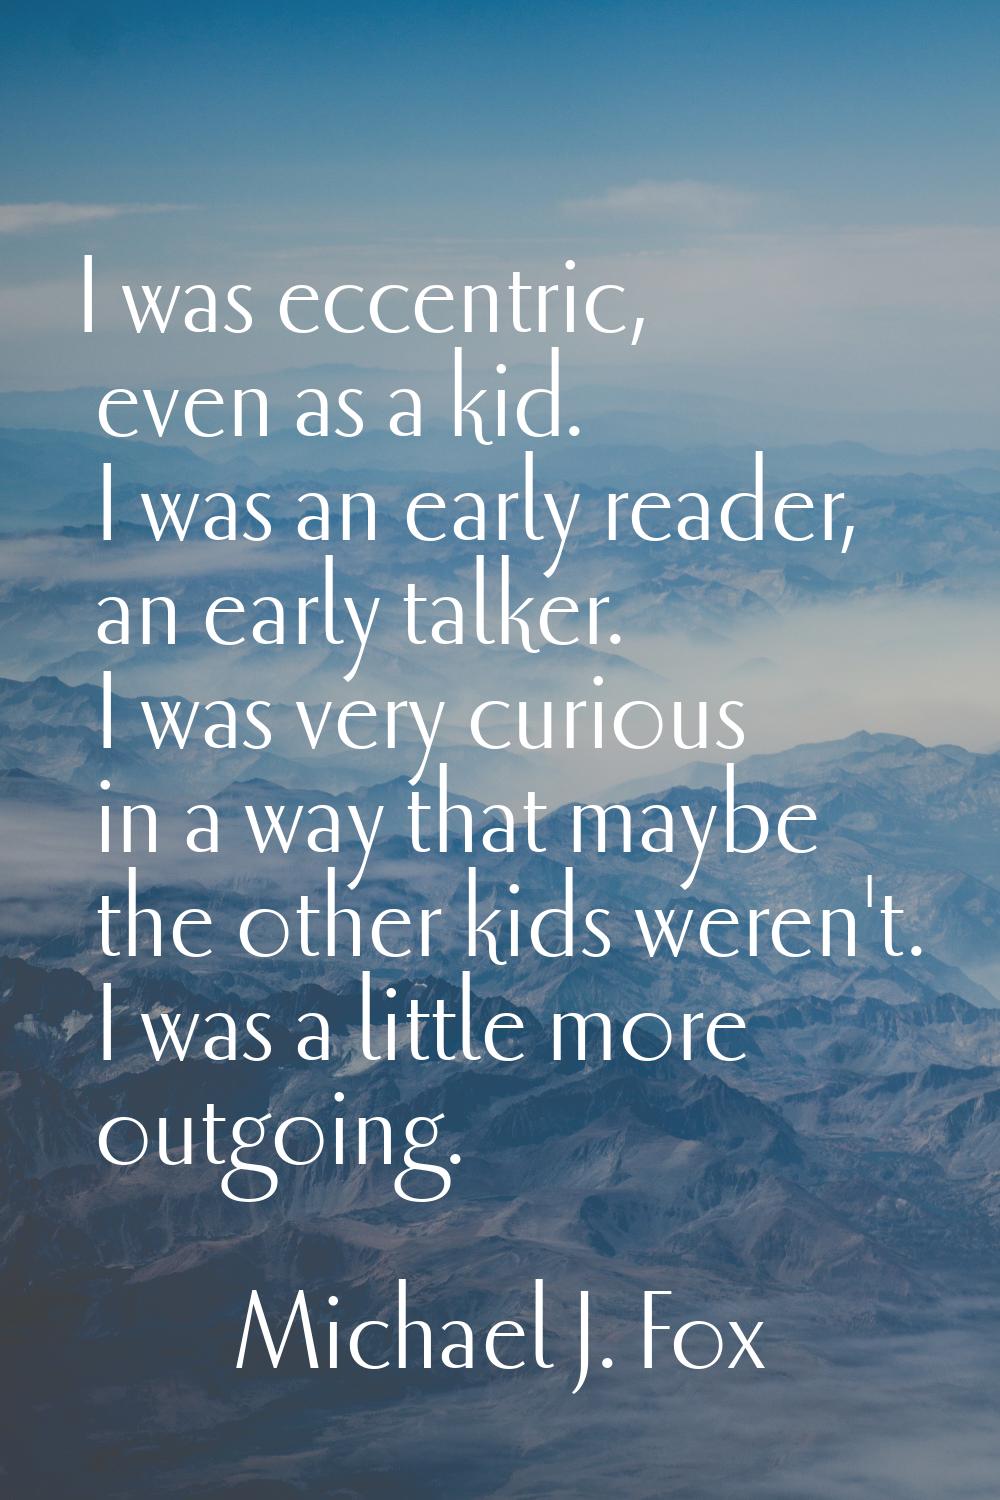 I was eccentric, even as a kid. I was an early reader, an early talker. I was very curious in a way